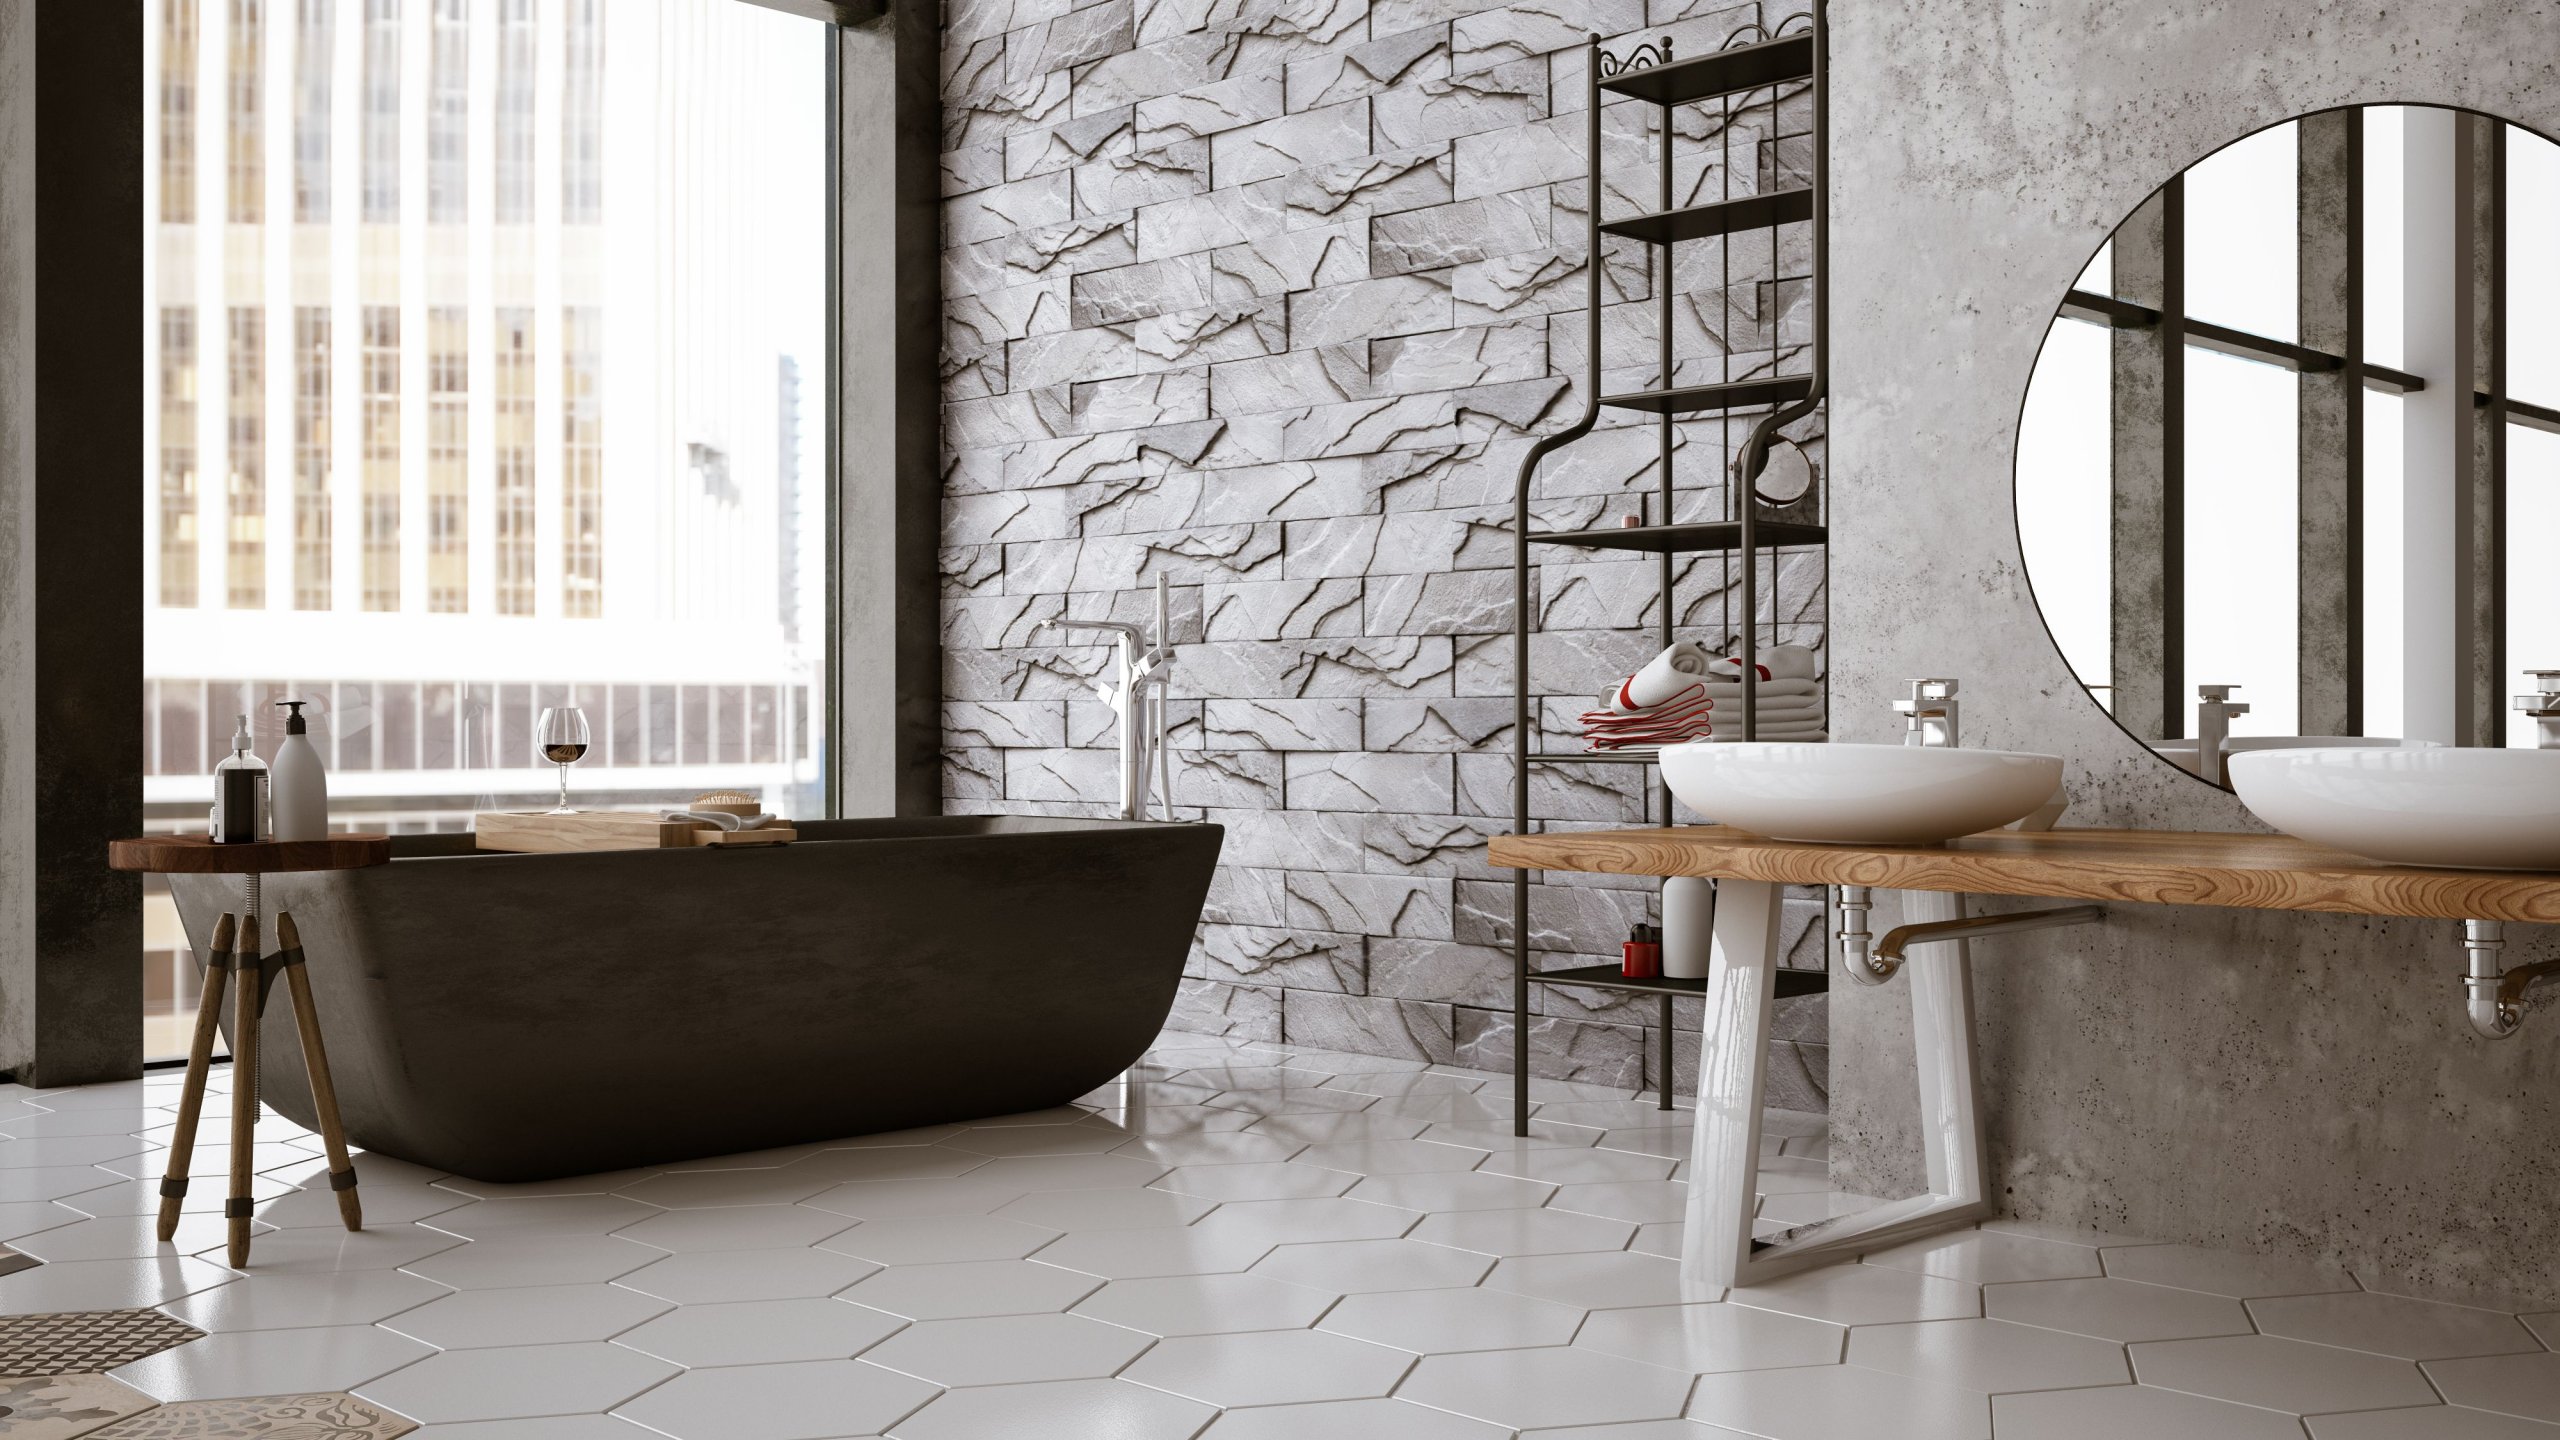 Consider these types when choosing bathroom tiles